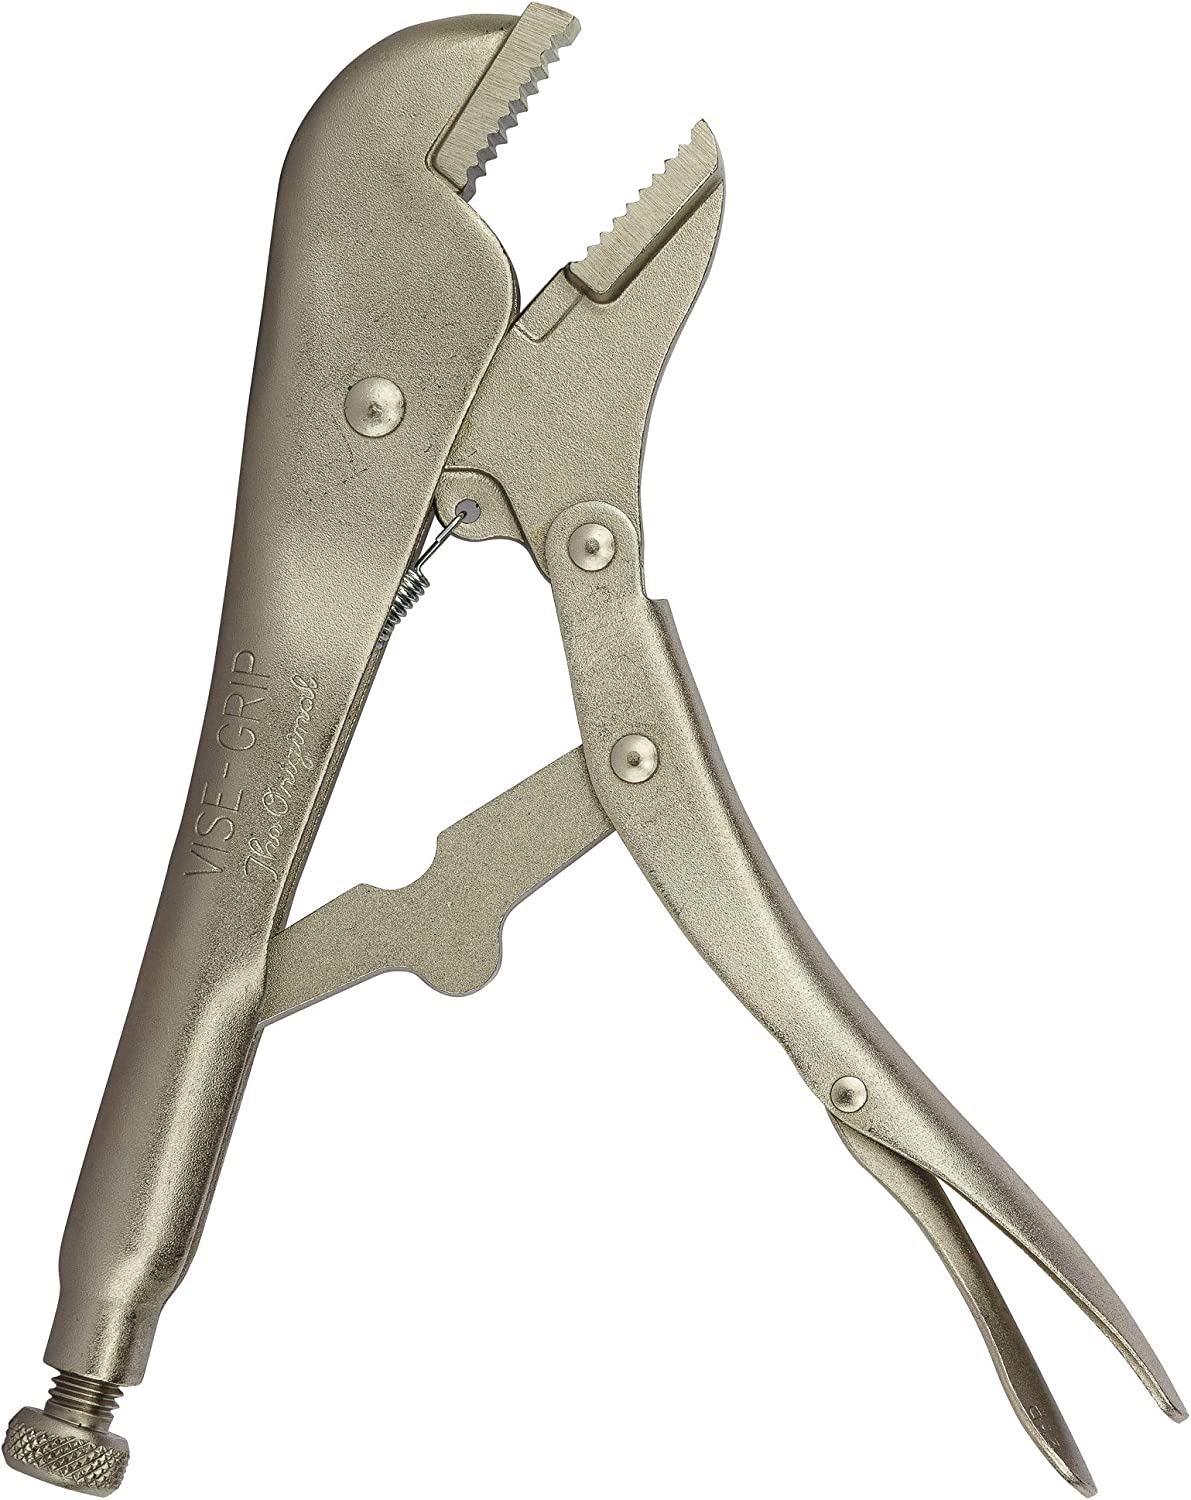 VISE-GRIP Fast Release 10R Straight Jaw Locking Pliers 10" 1